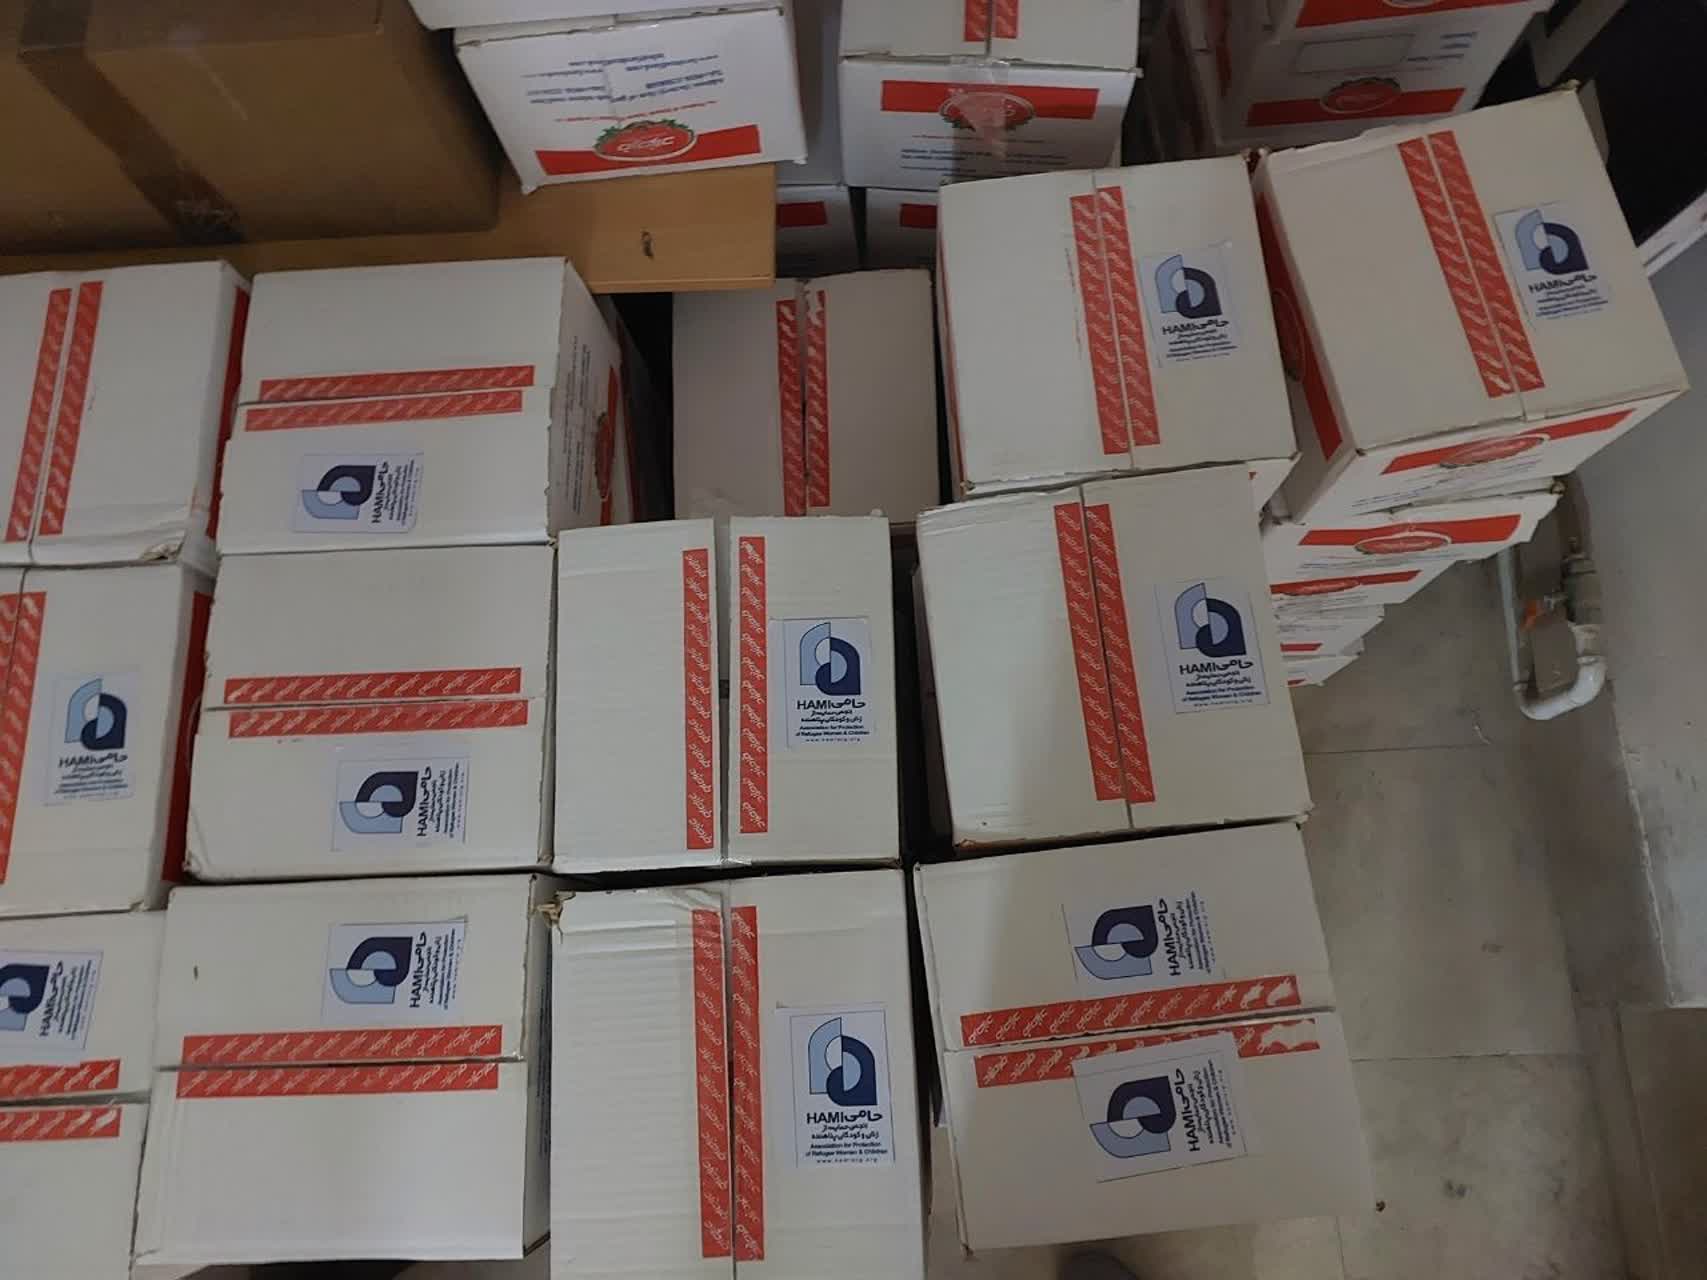 Distribution of relief packages